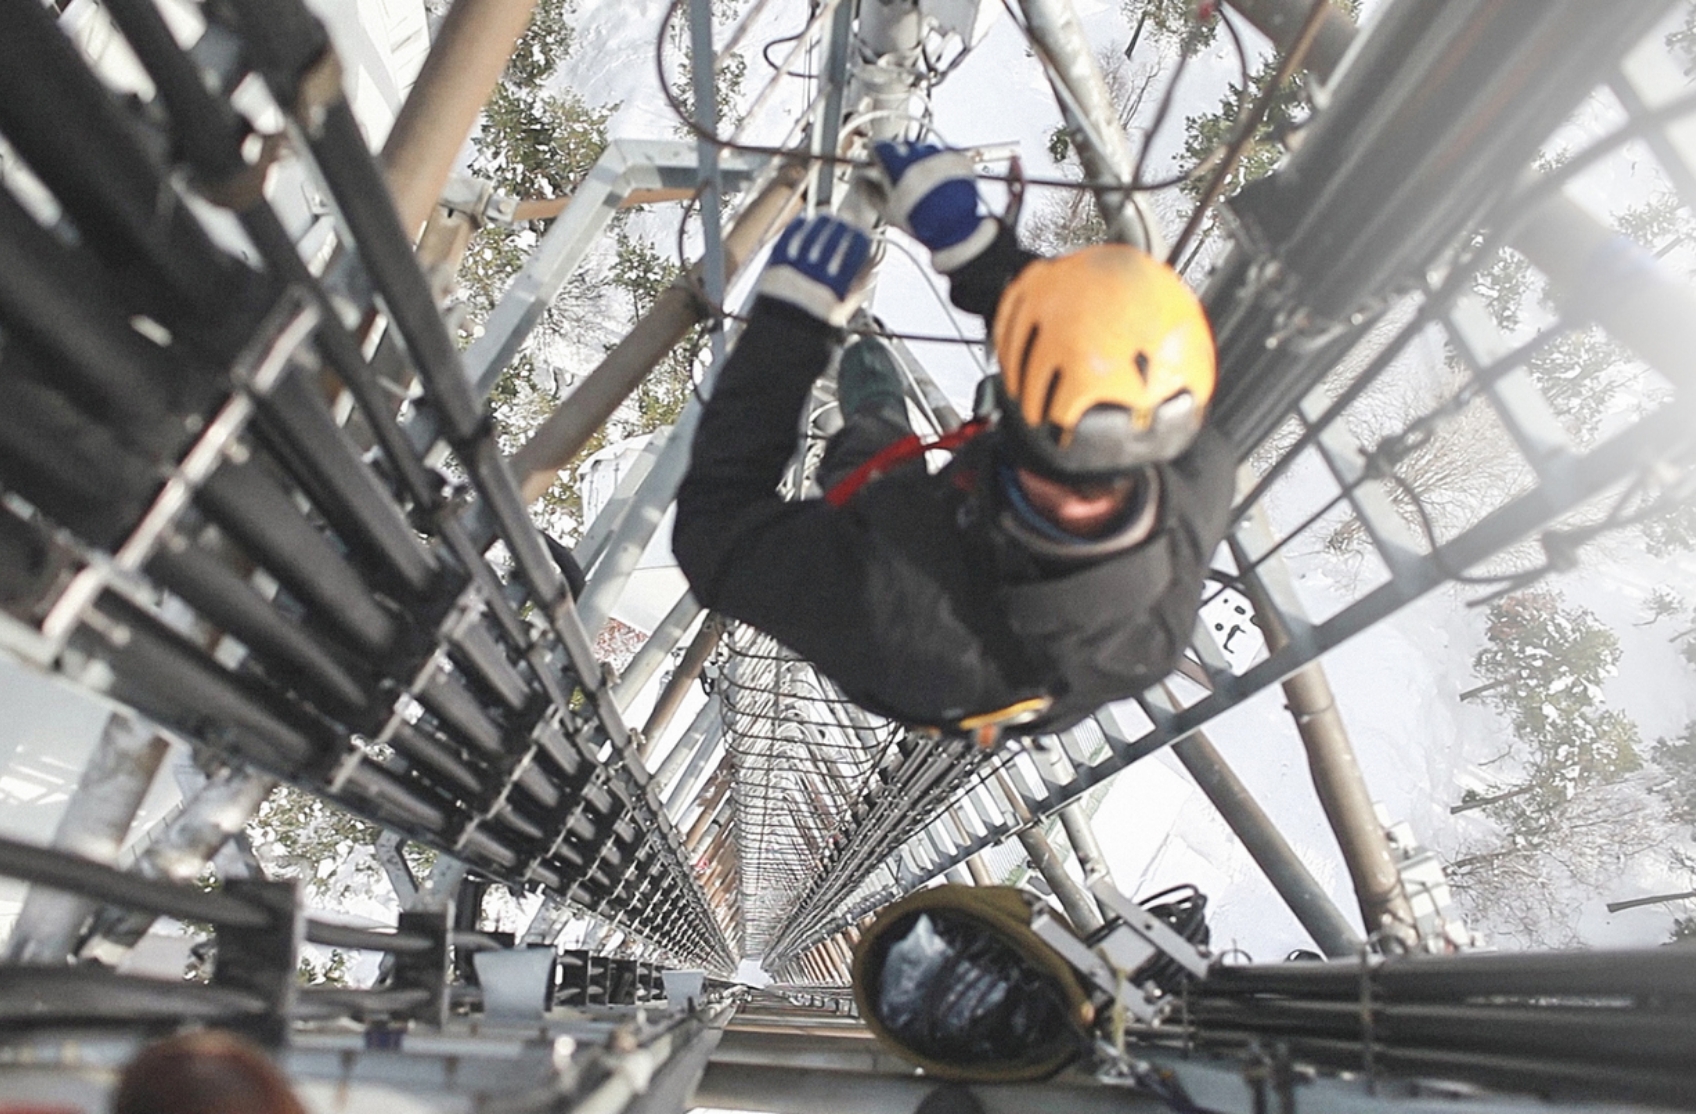 a tower technician in safety gear working high above the ground